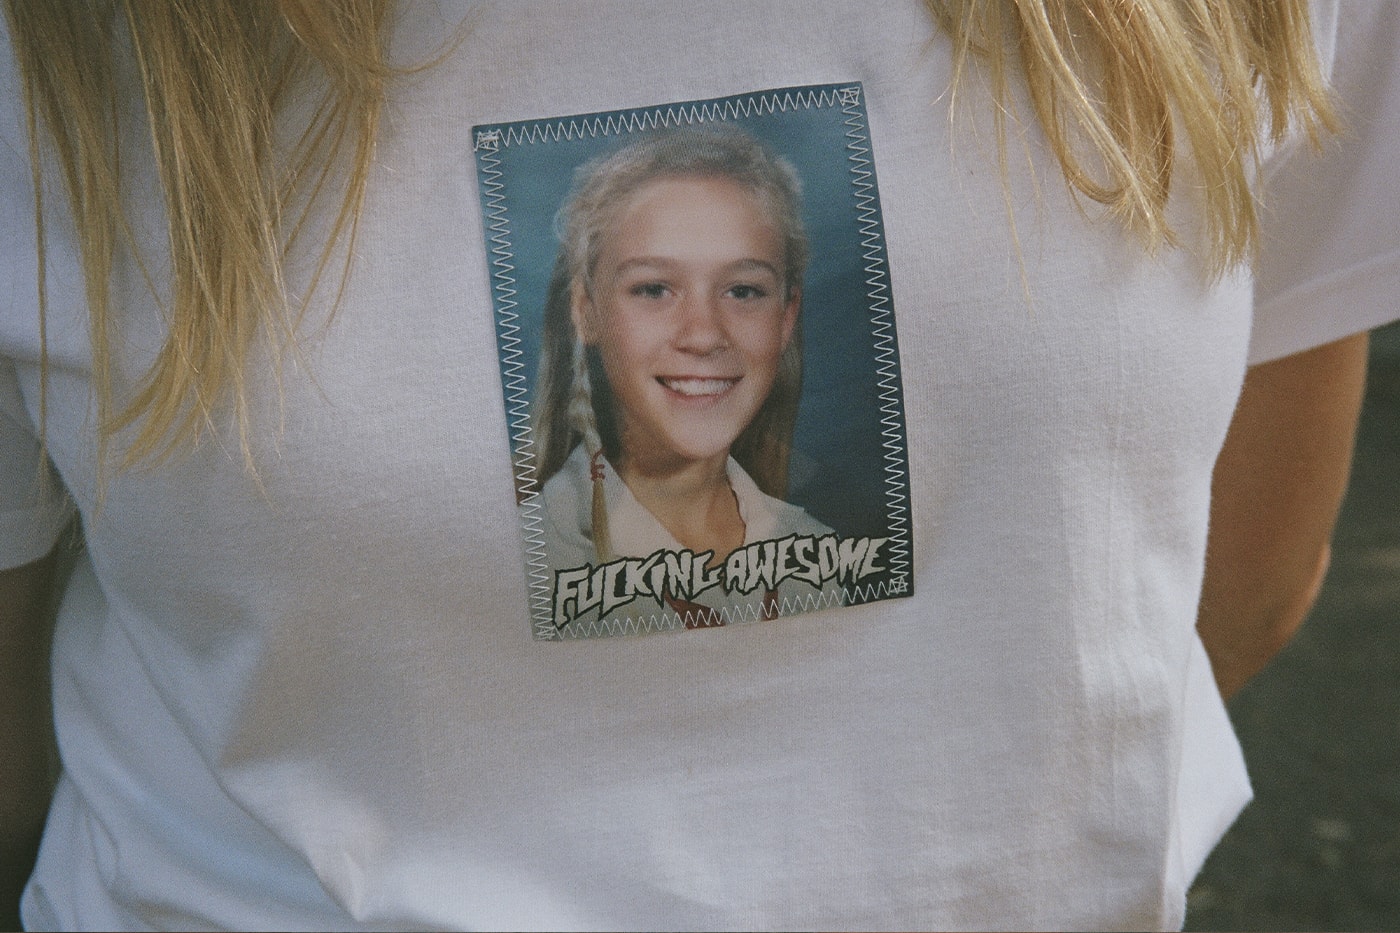 Chloë Sevigny Fucking Awesome Capsule Collection Release Info Date Buy Price 